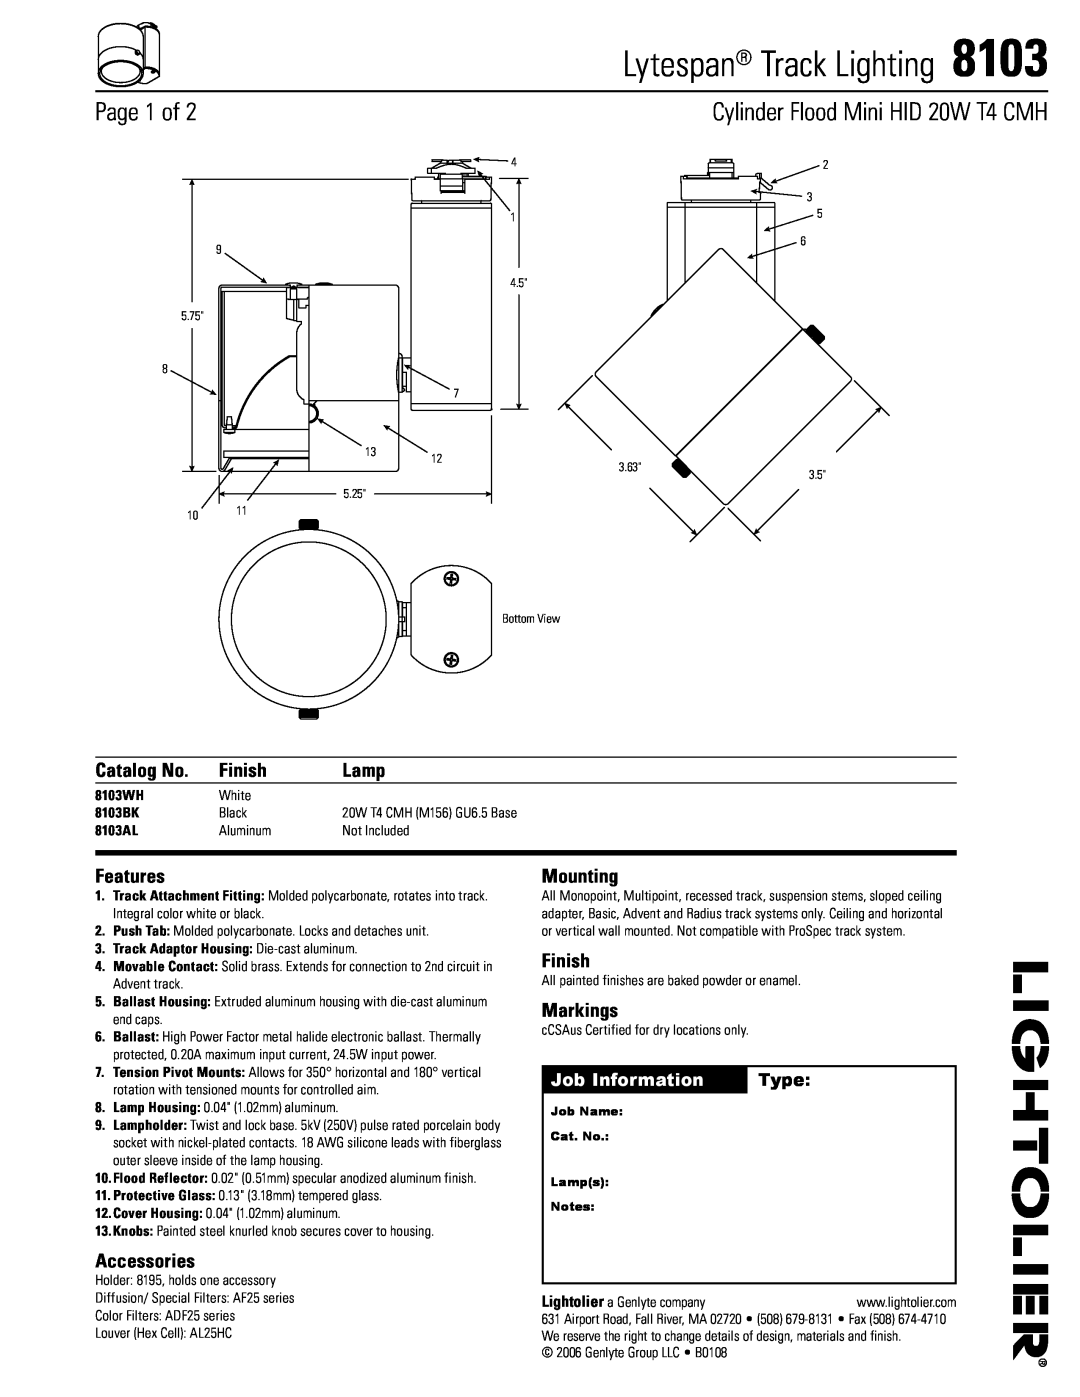 Lightolier 8103 manual Catalog No, Finish, Lamp, Features, Accessories, Mounting, Markings, Job Information, Type, Page of 